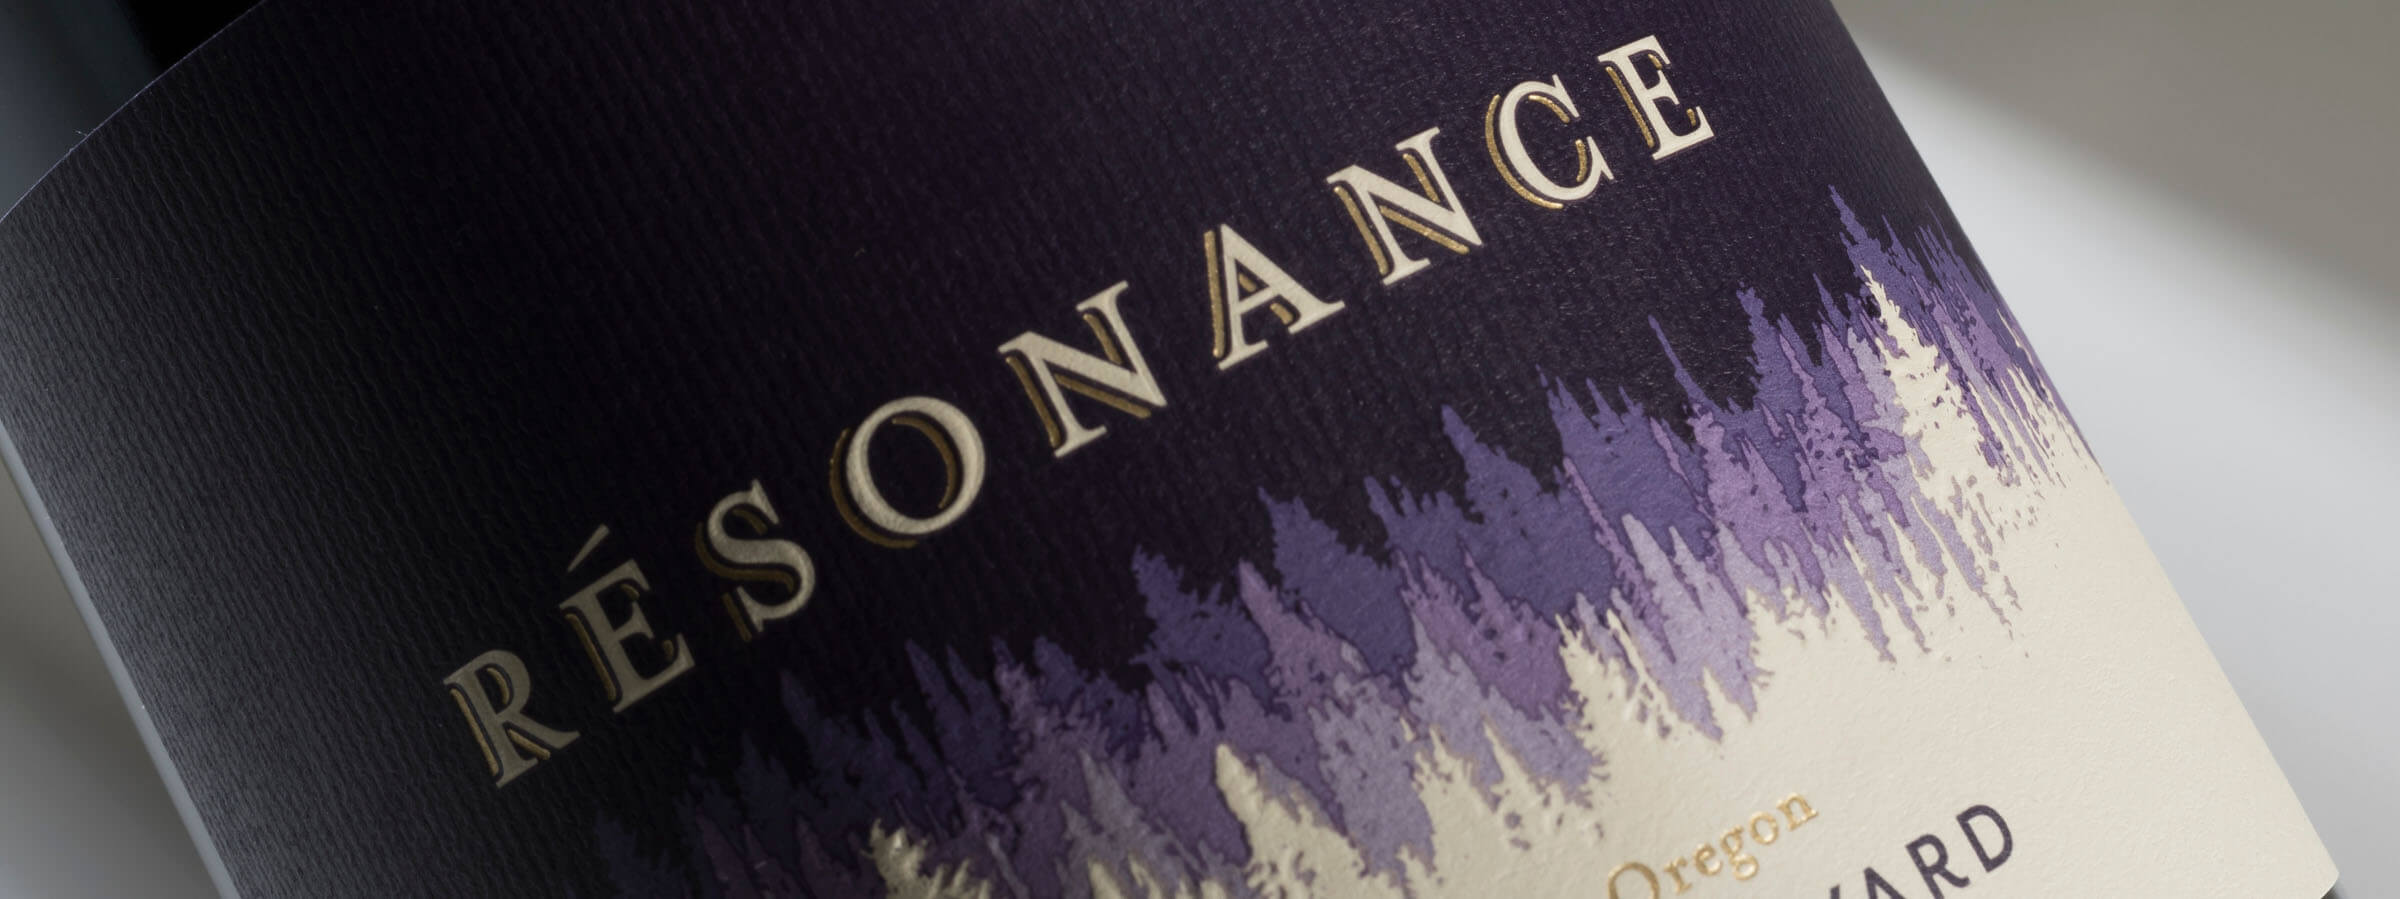 close up of RÉSONANCE name in cream on a deep purple colour wine label with graphic rows of trees beneath in shades of purple to cream beneath